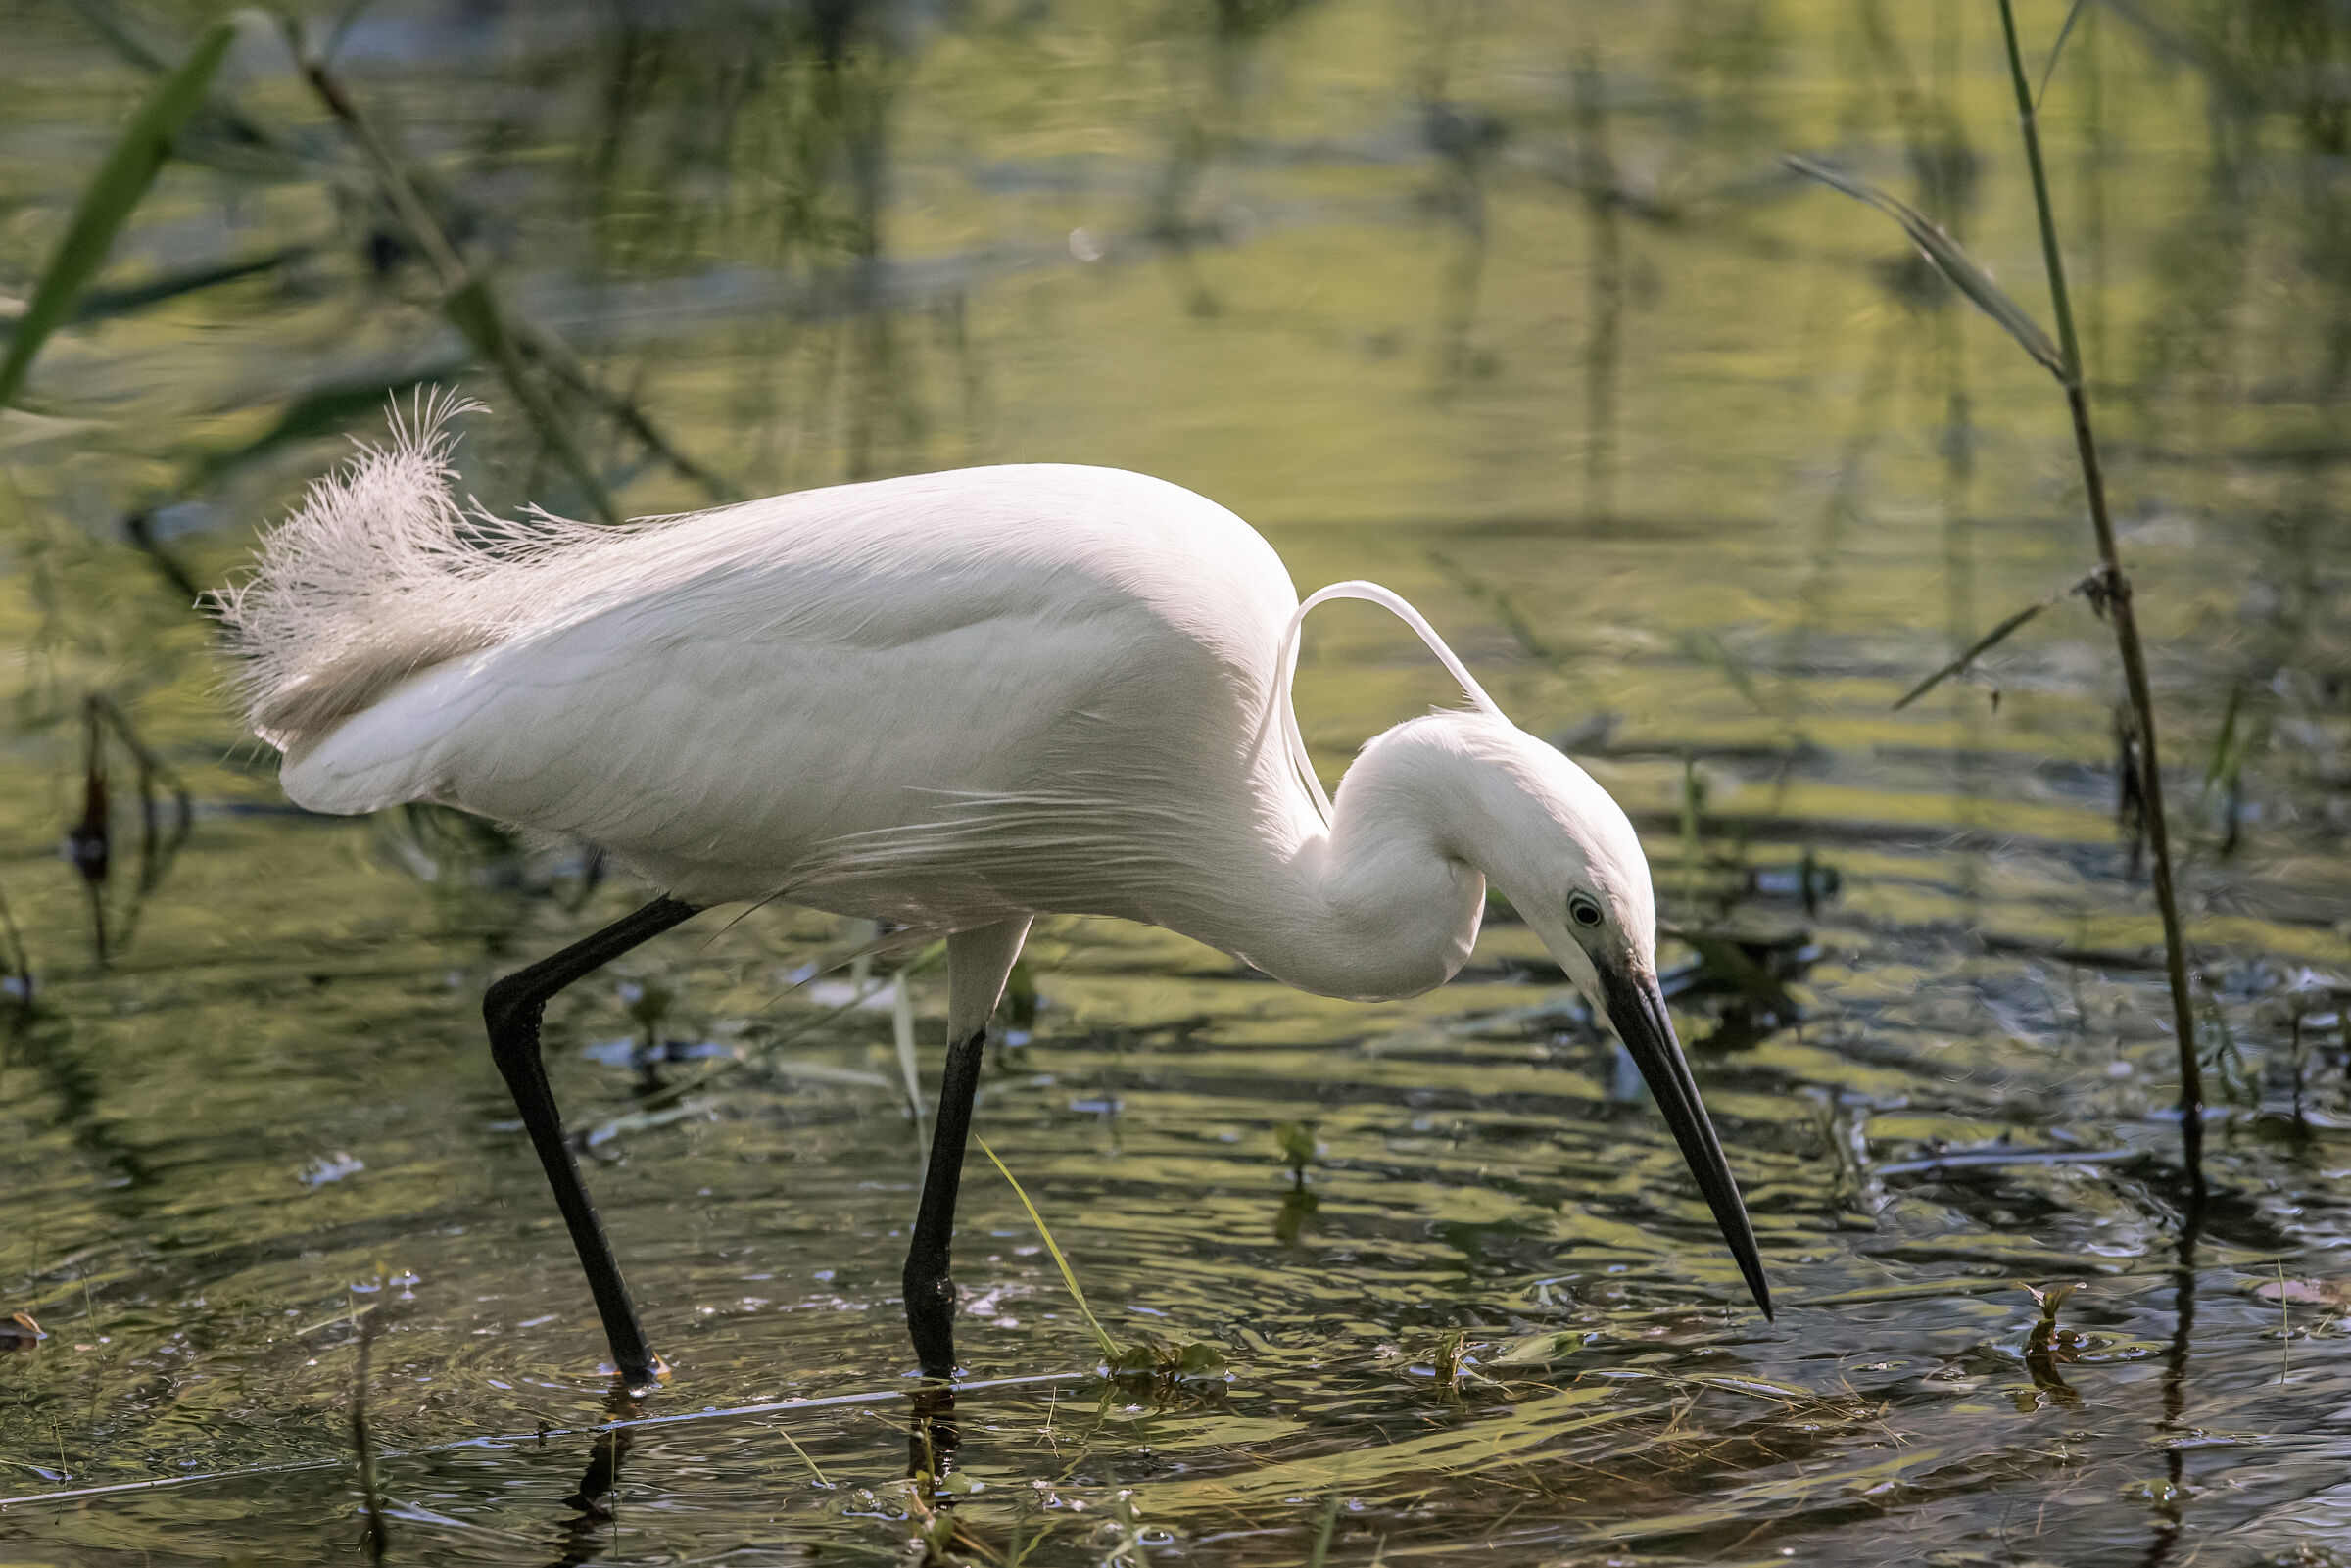 The egret in search of food...